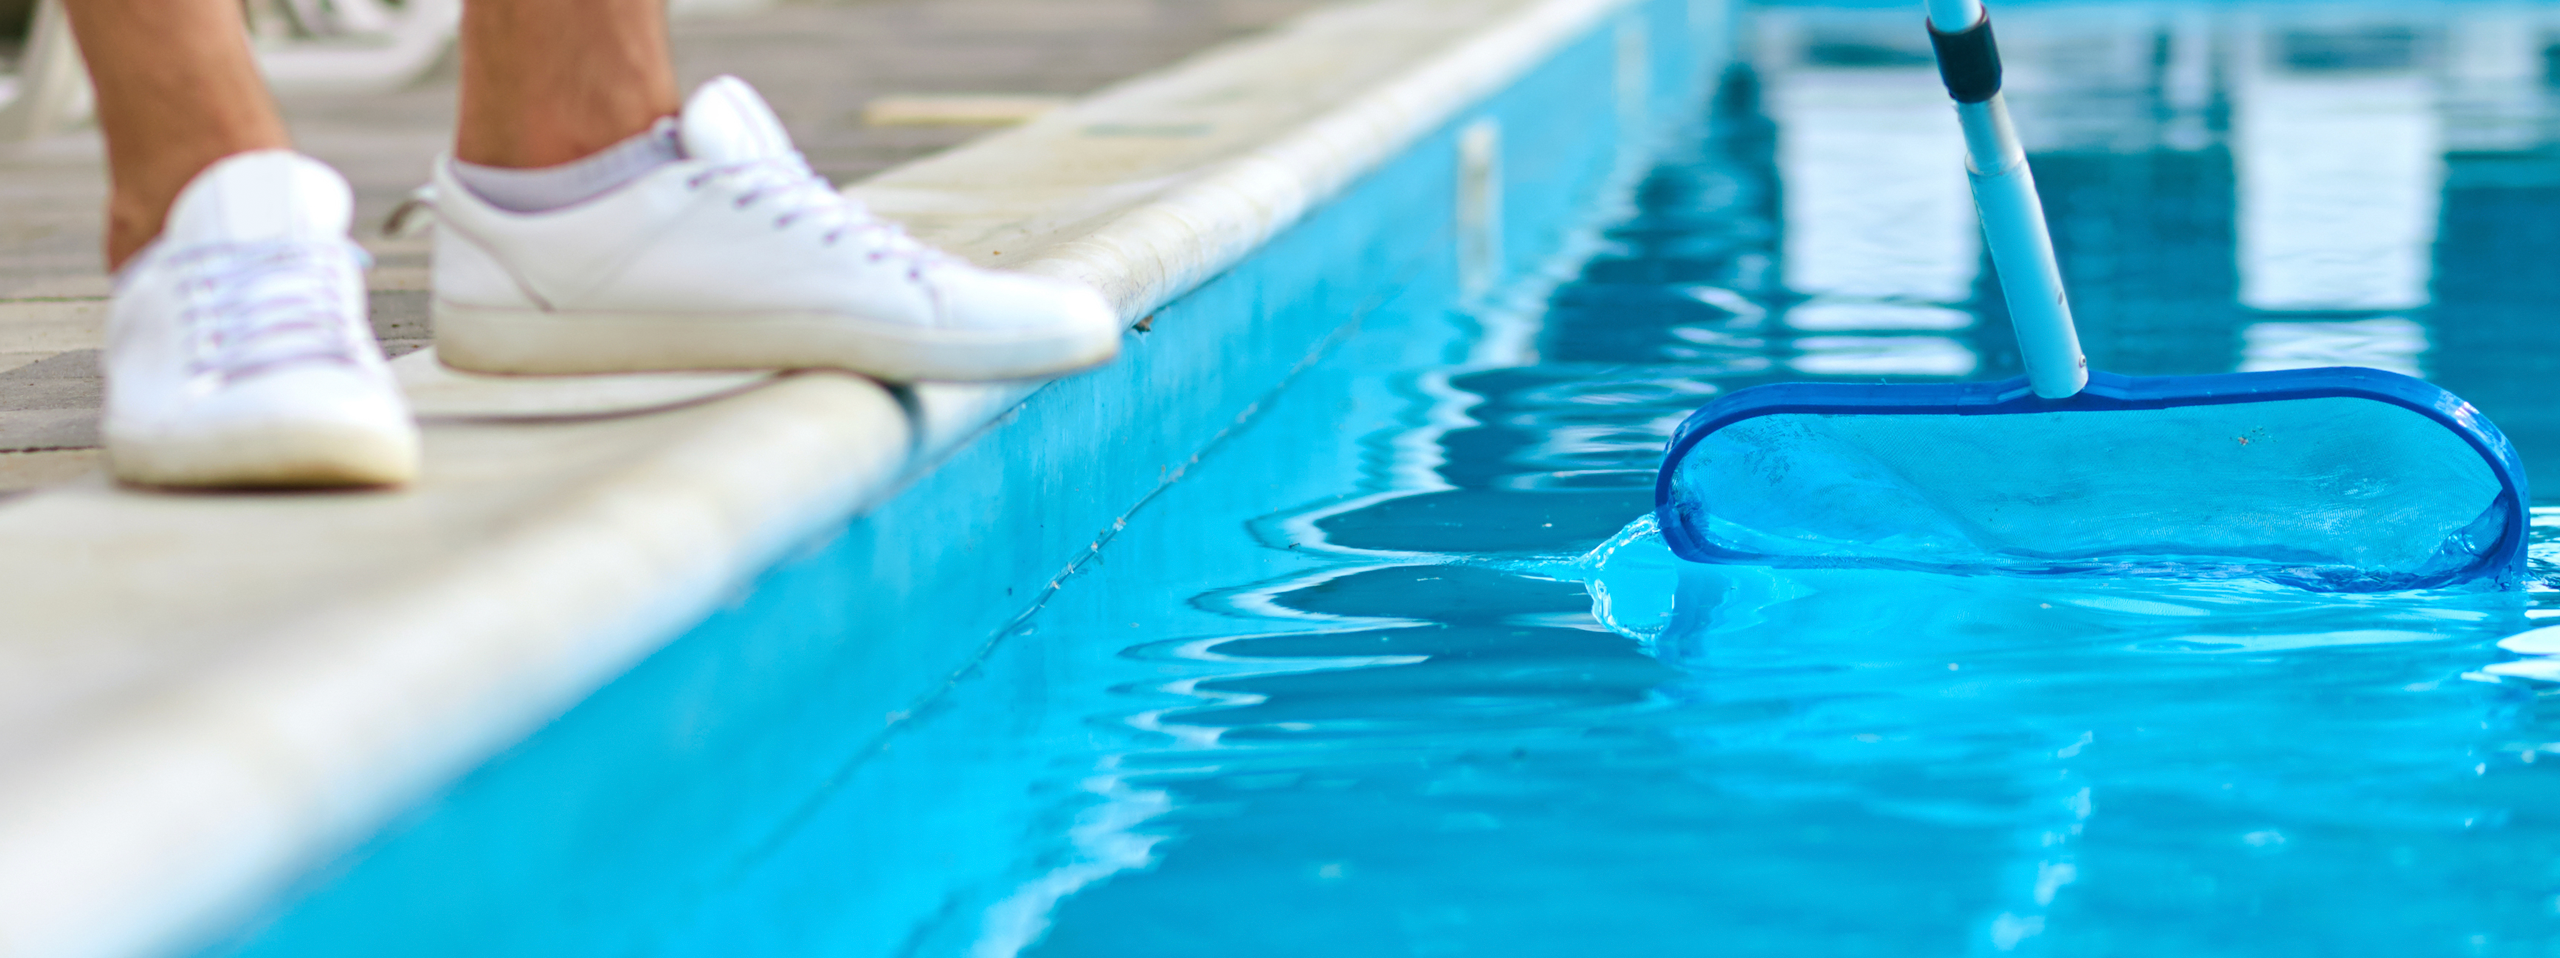 5 Ways to Get the Most Out of Your Pool This Summer